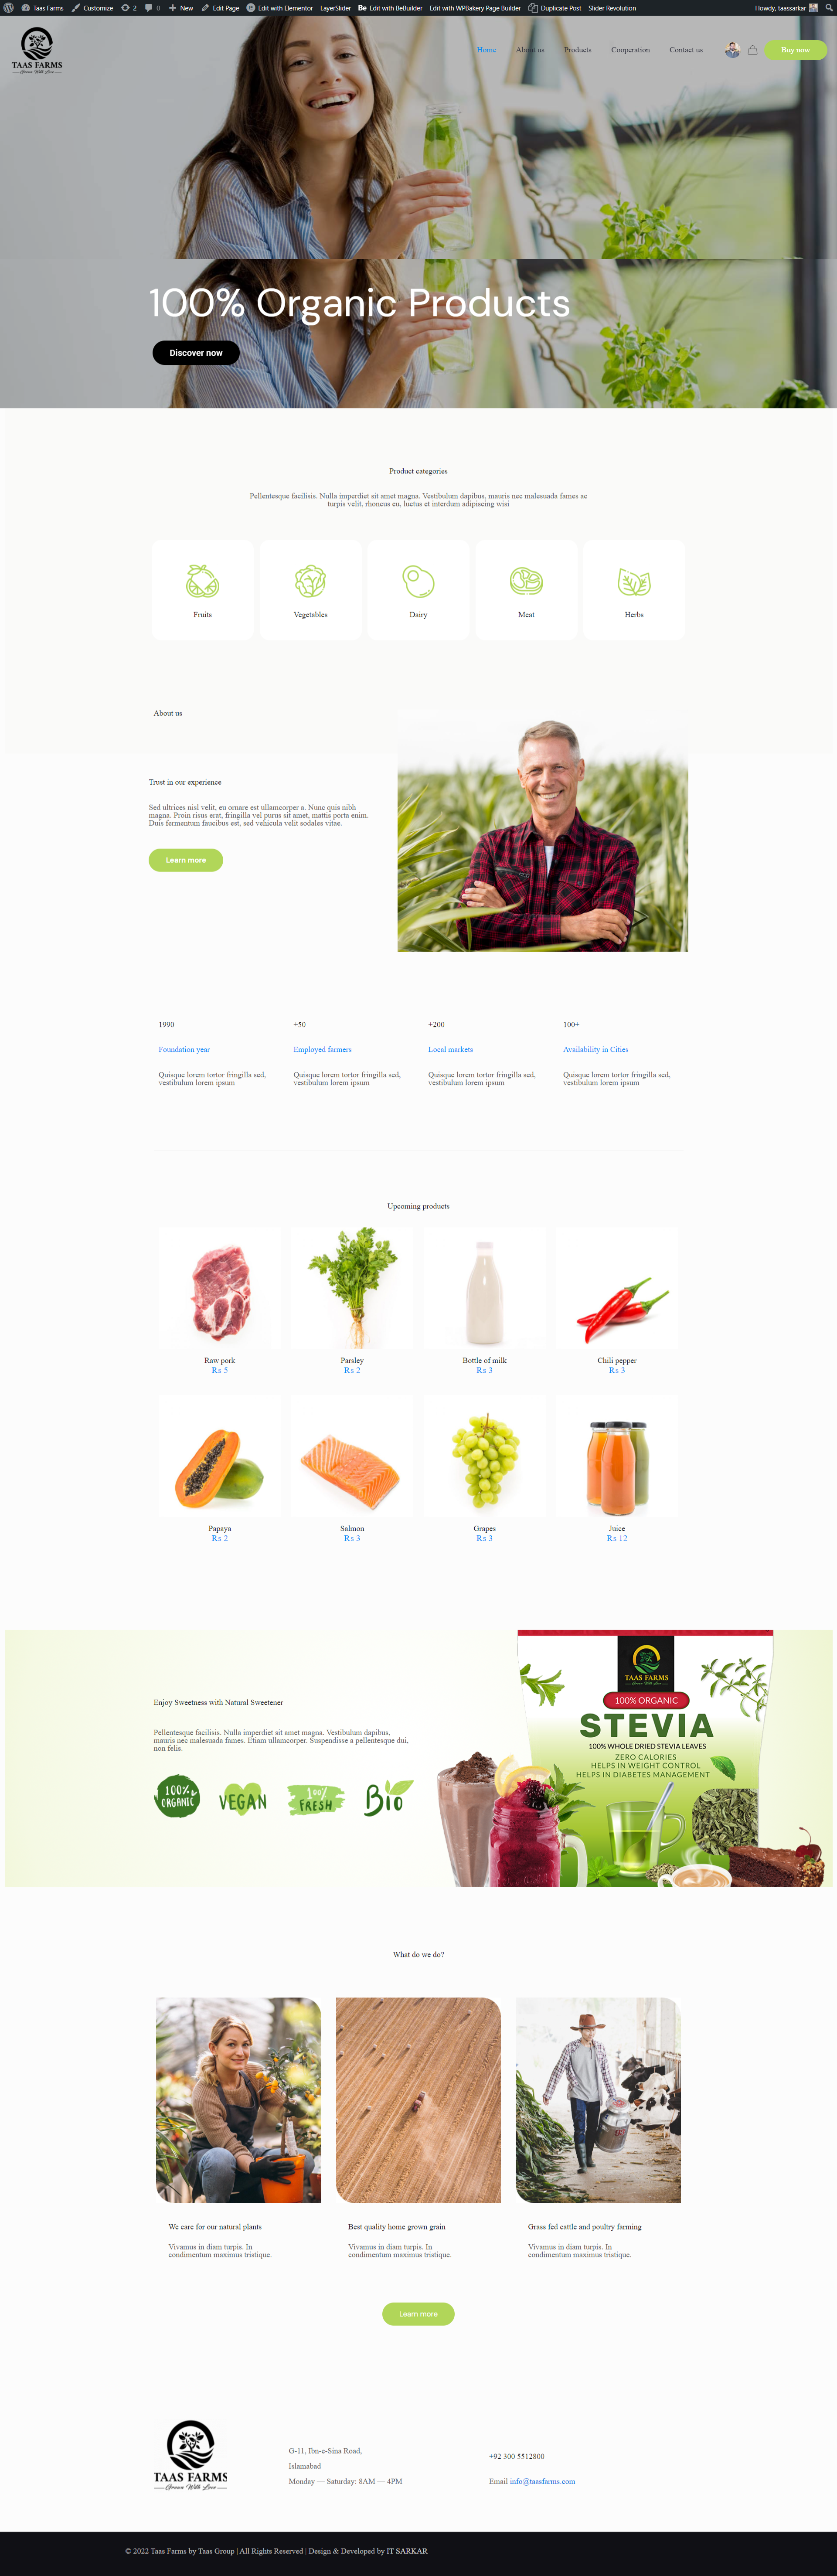 FireShot Capture 072 - Taas Farms – Just another WordPress site - taasfarms.com.png